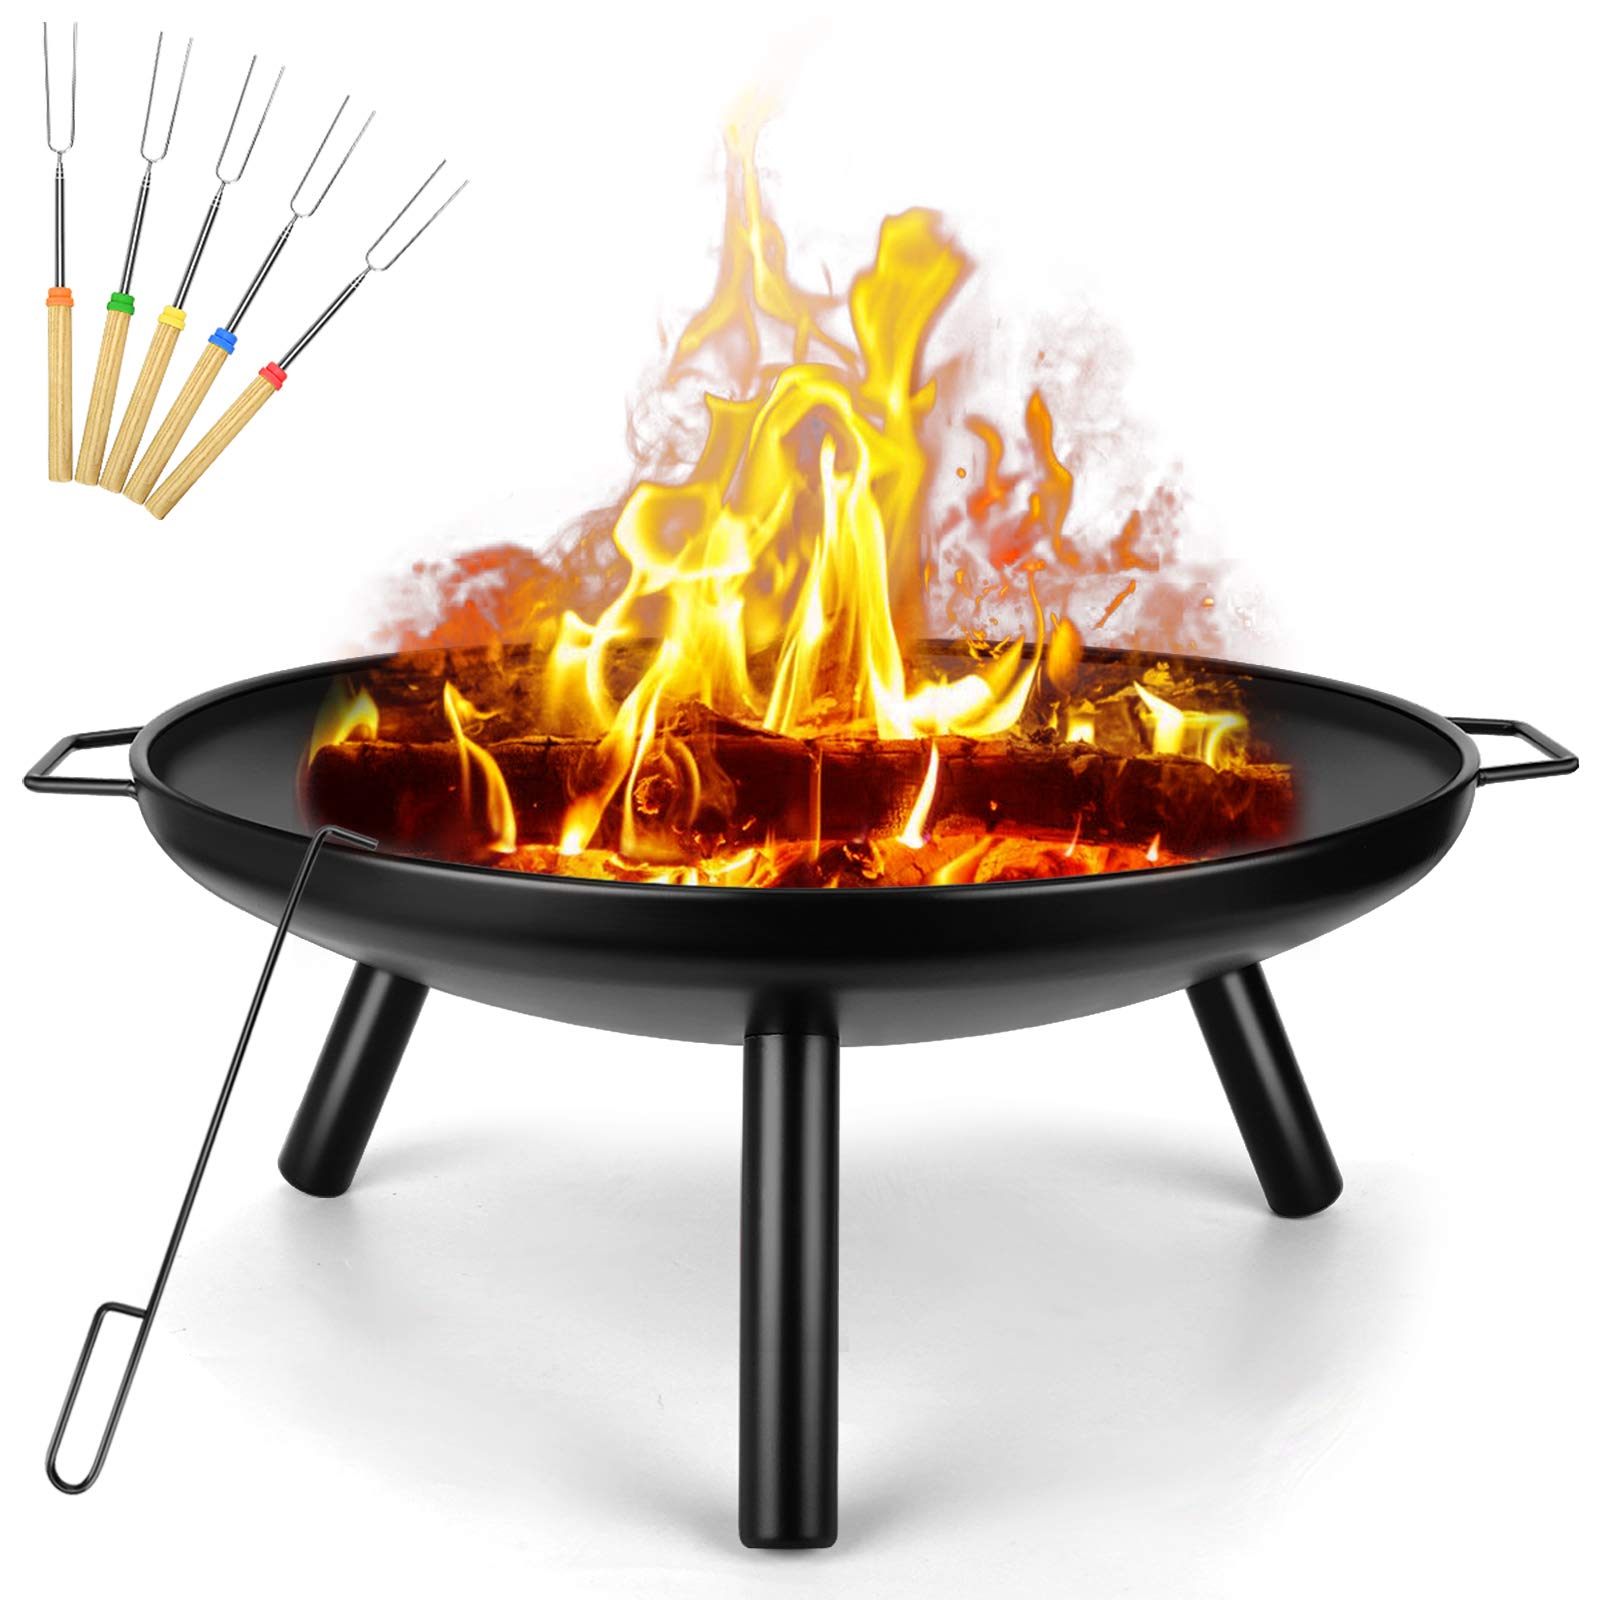 Outdoor Fire Pit Garden Patio Heater Charcoal Log Wood Burner Steel Fire Bowl For BBQ Camping Picnic